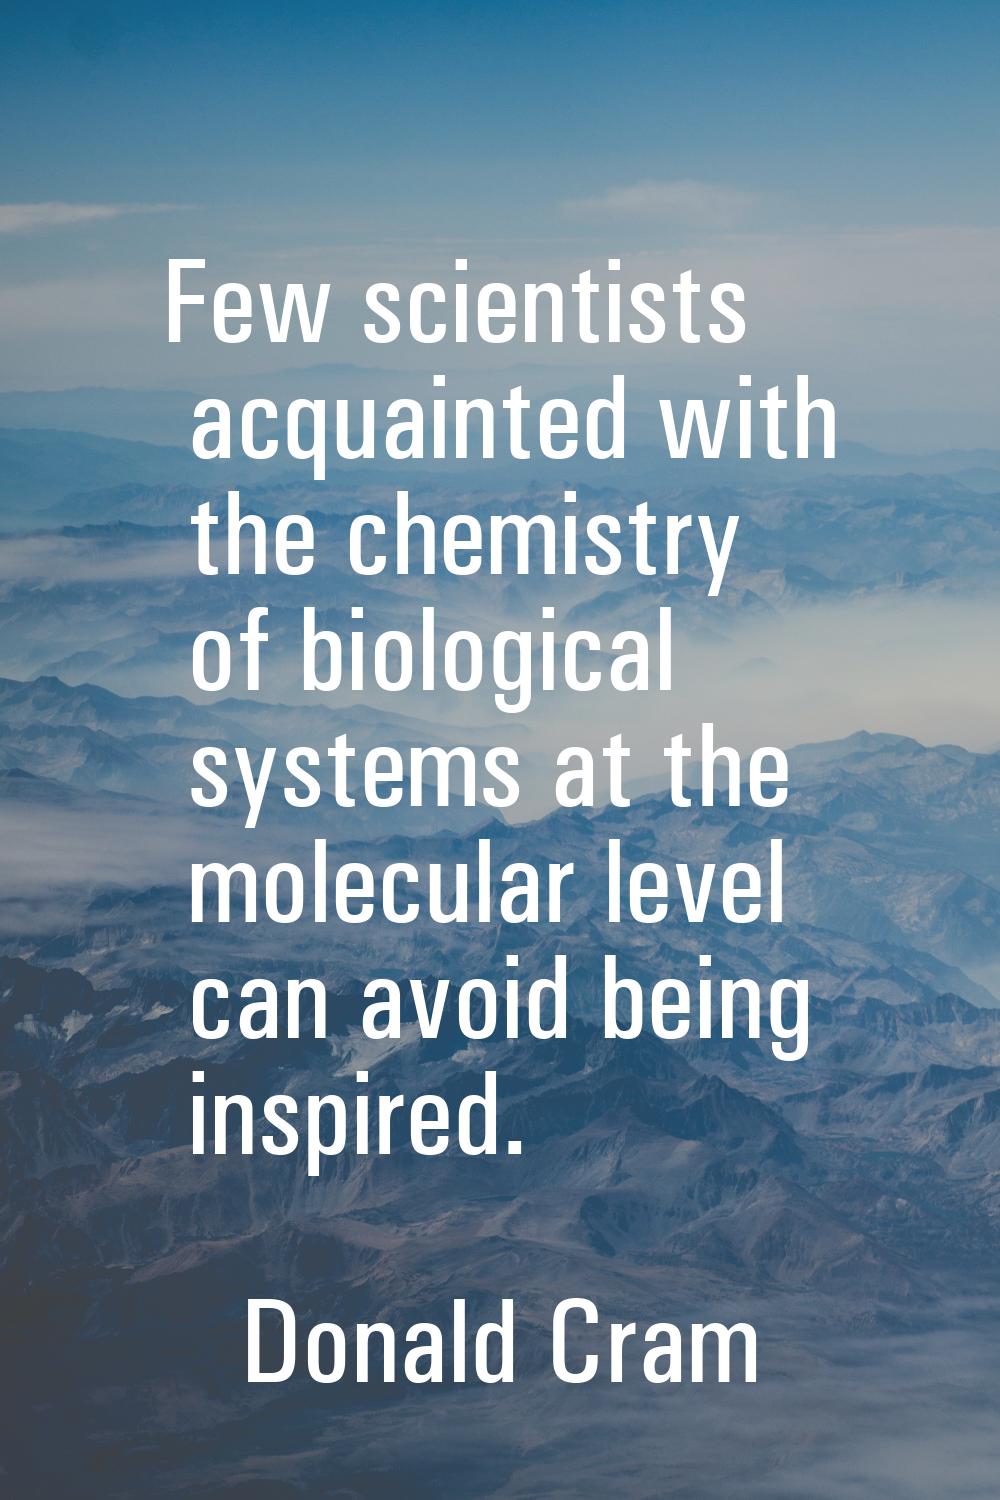 Few scientists acquainted with the chemistry of biological systems at the molecular level can avoid